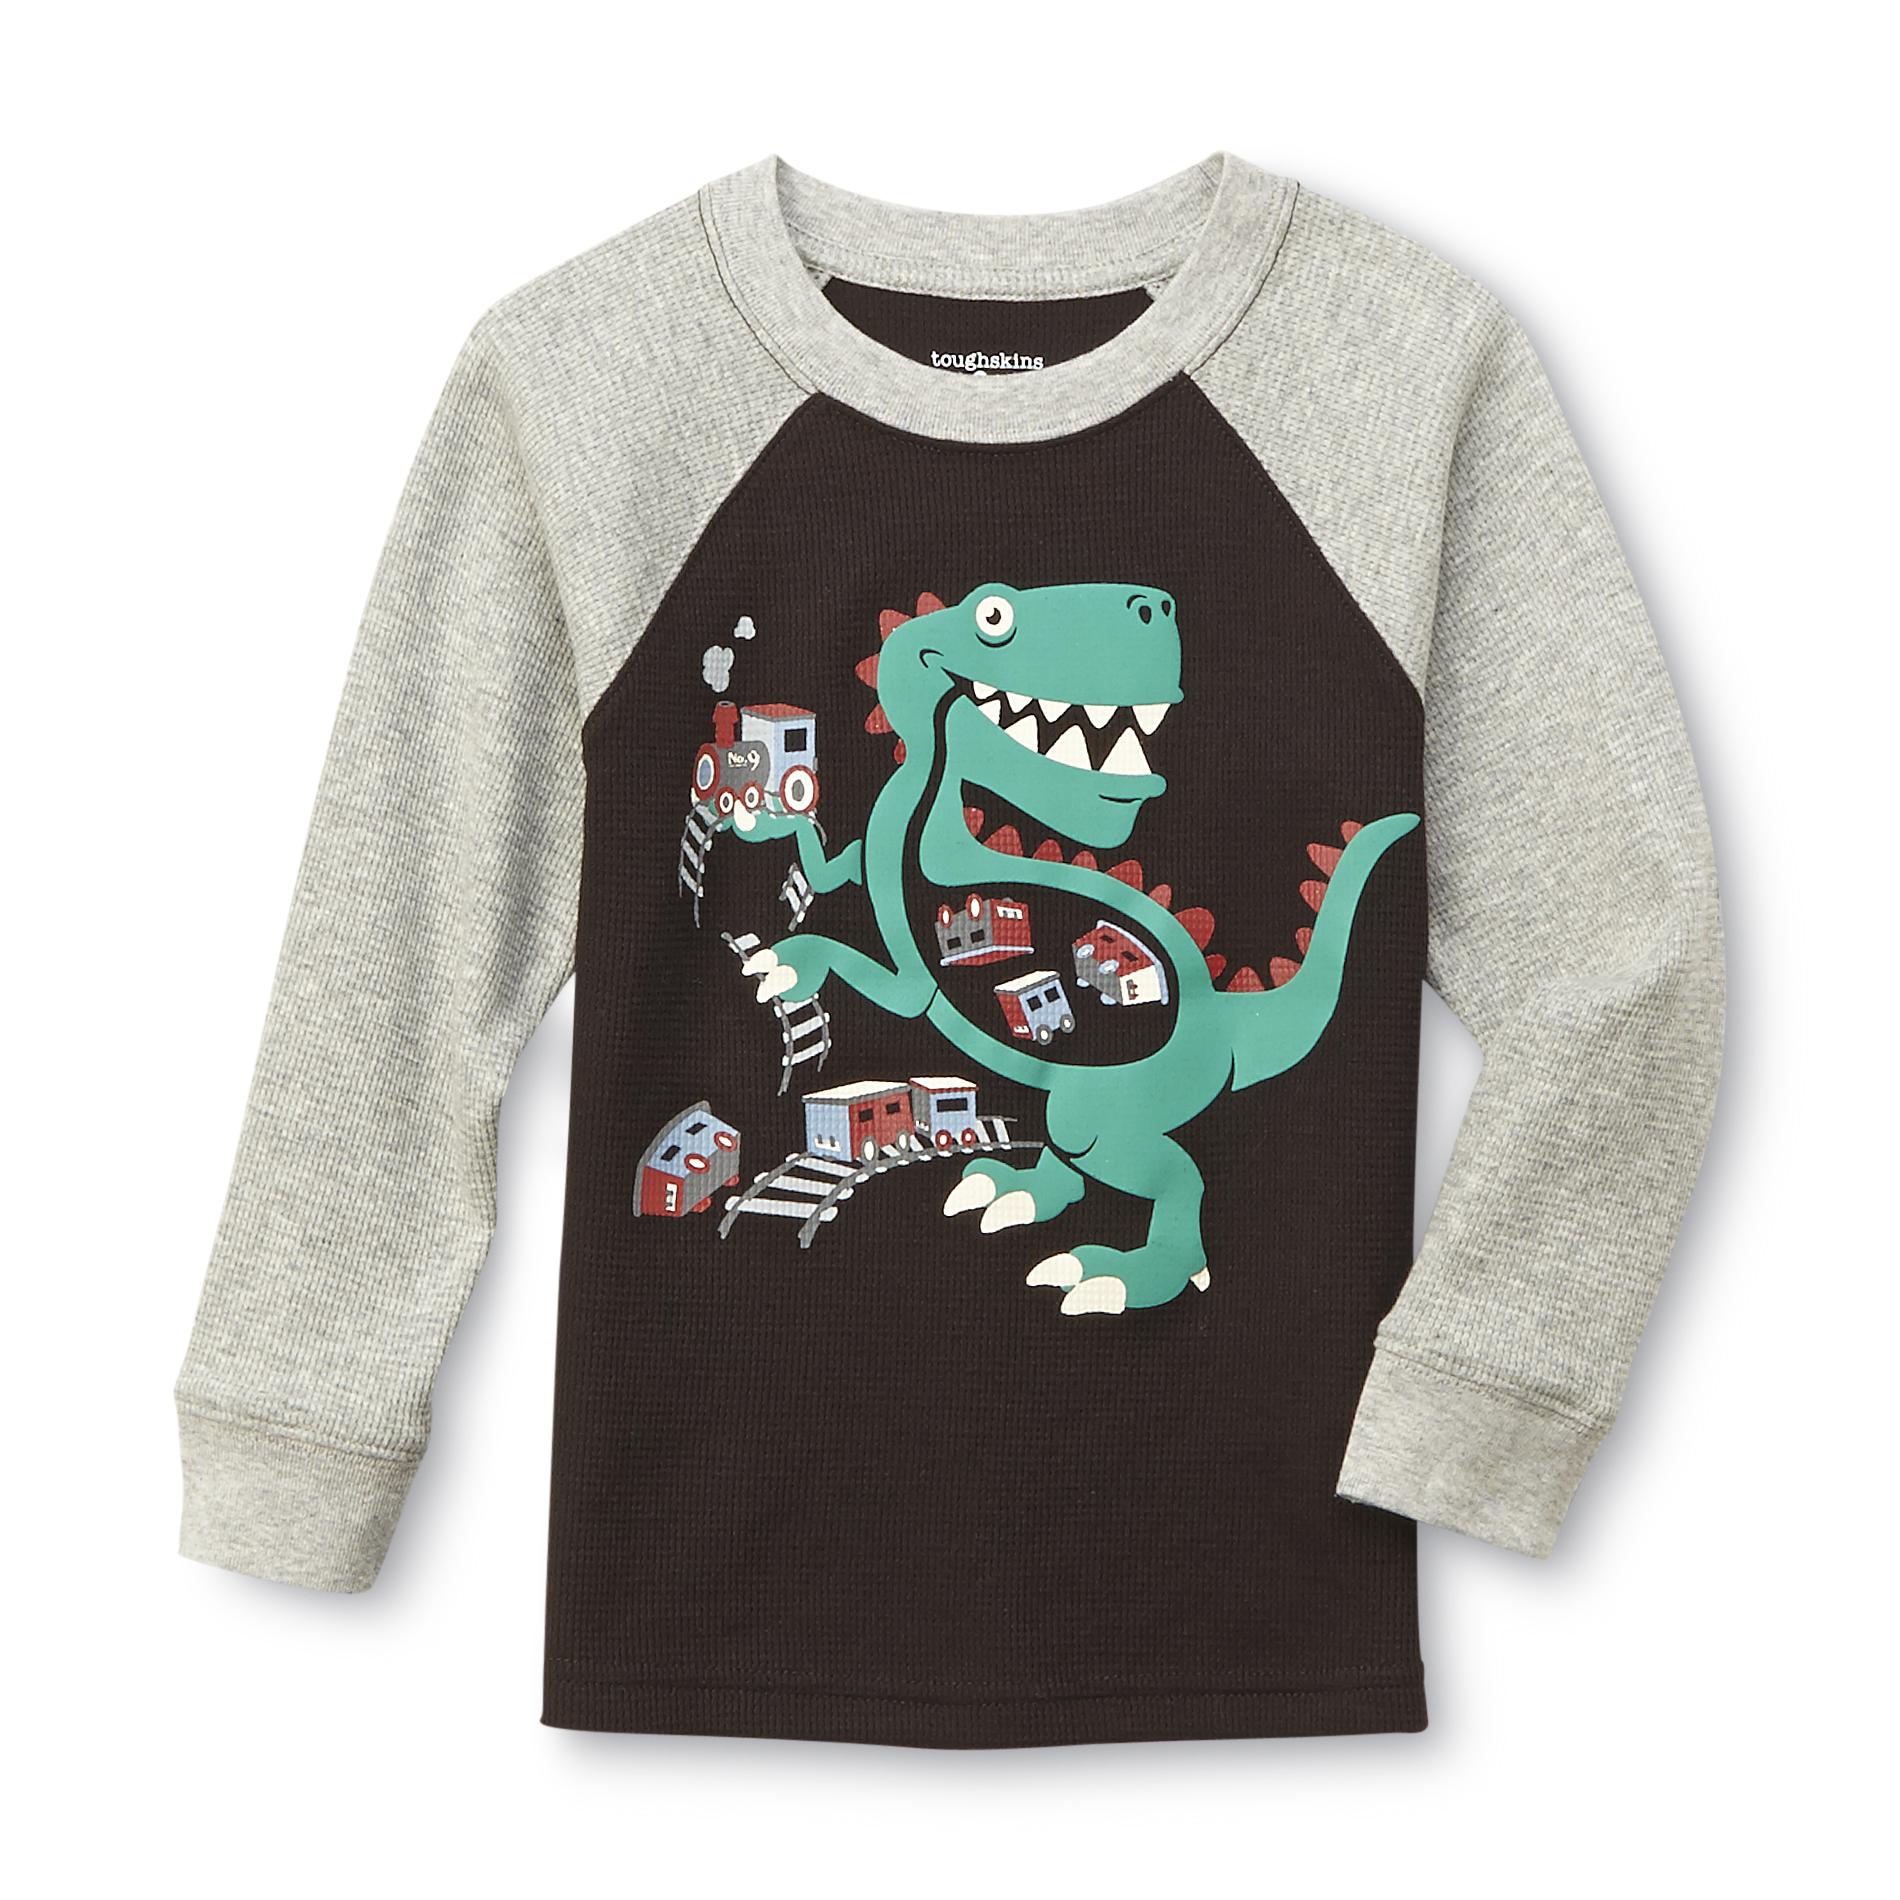 Toughskins Infant & Toddler Boy's Thermal Graphic Shirt - Hungry Dinosaur